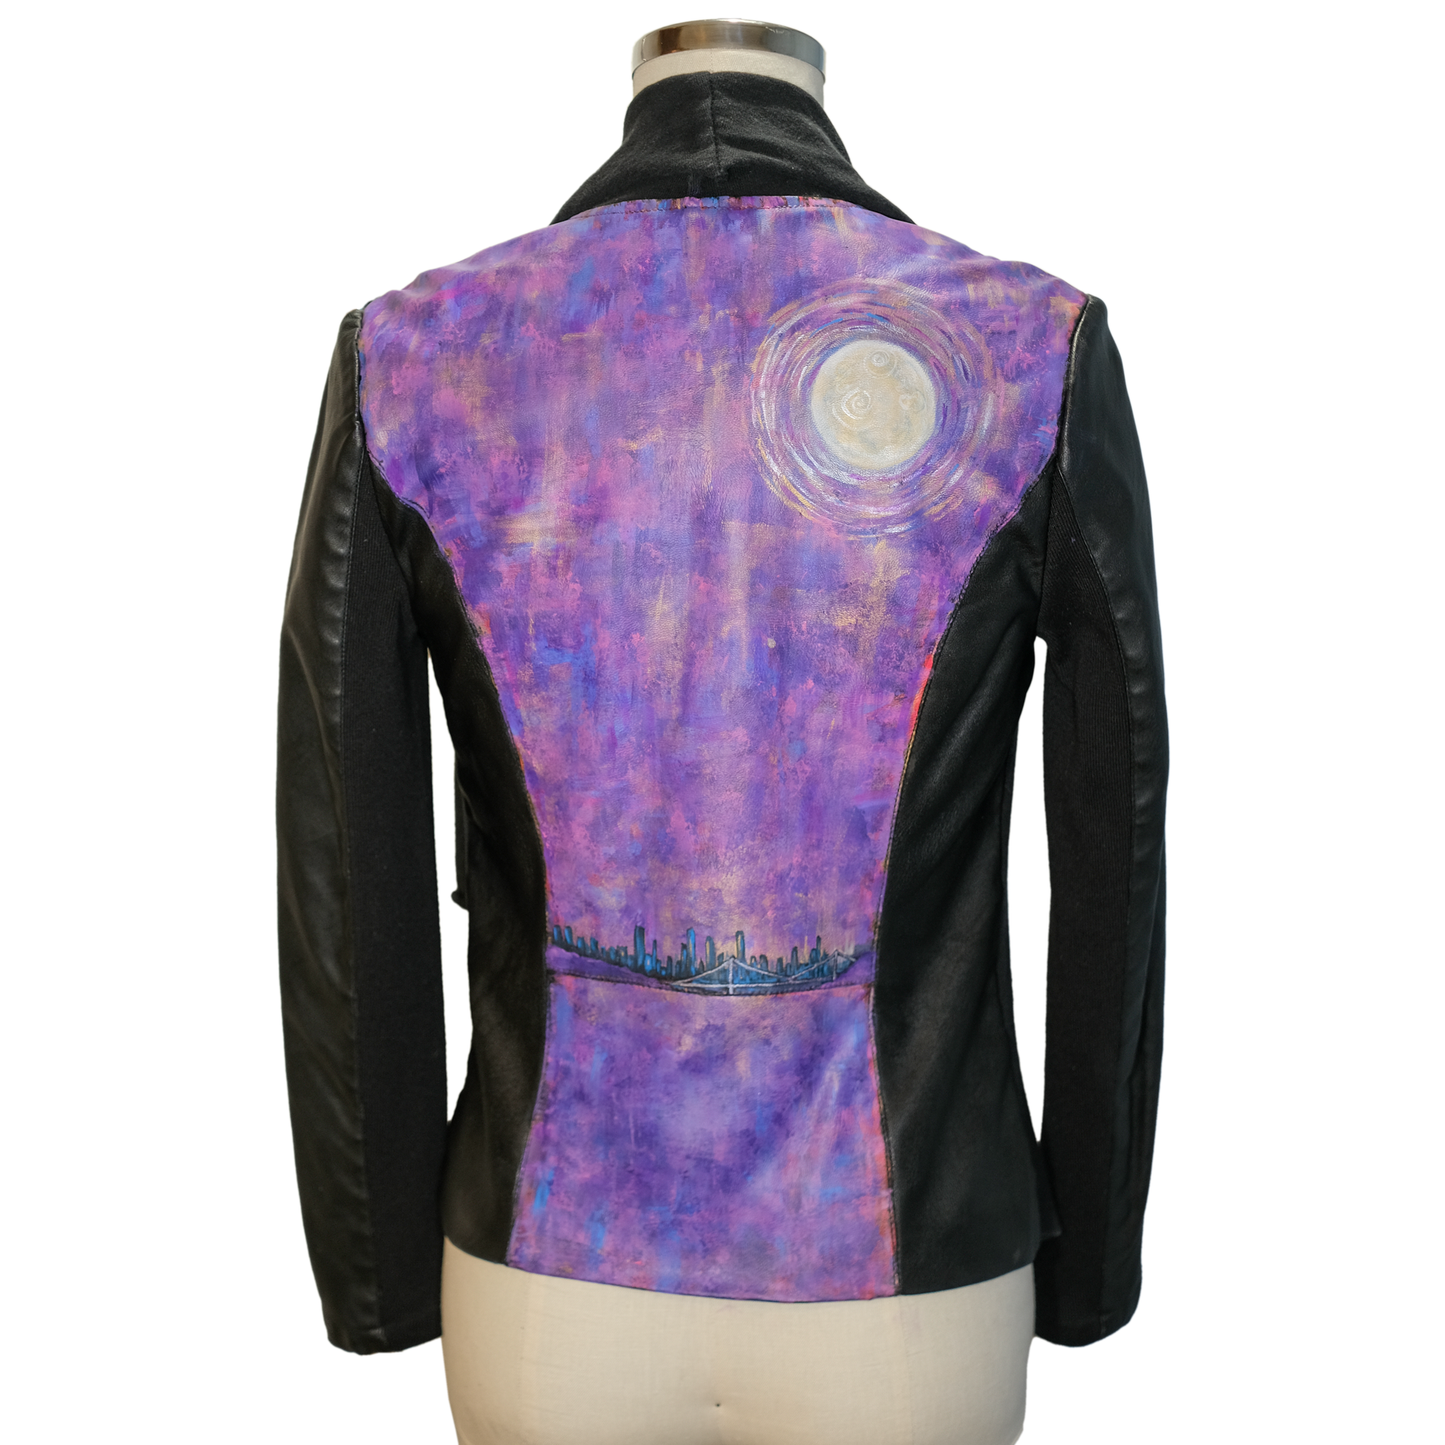 “It Was All A Dream” - Up-cycled Jacket - Size Small - Hand Painted by Skye De La Rosa